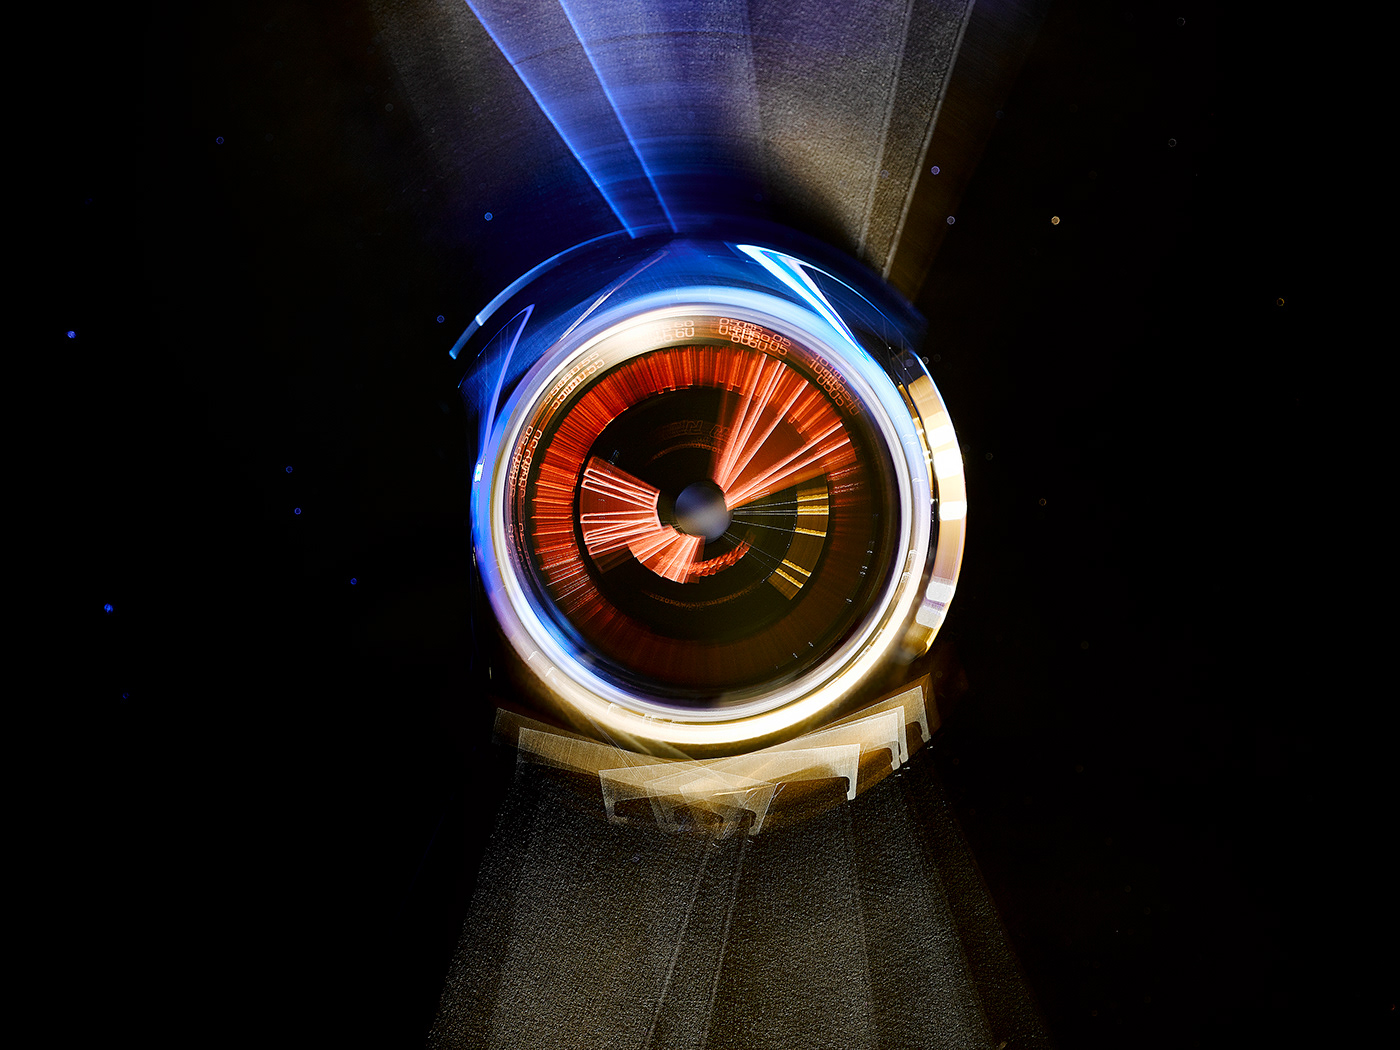 time and space. stilllife product watch timepiece abstract art photo